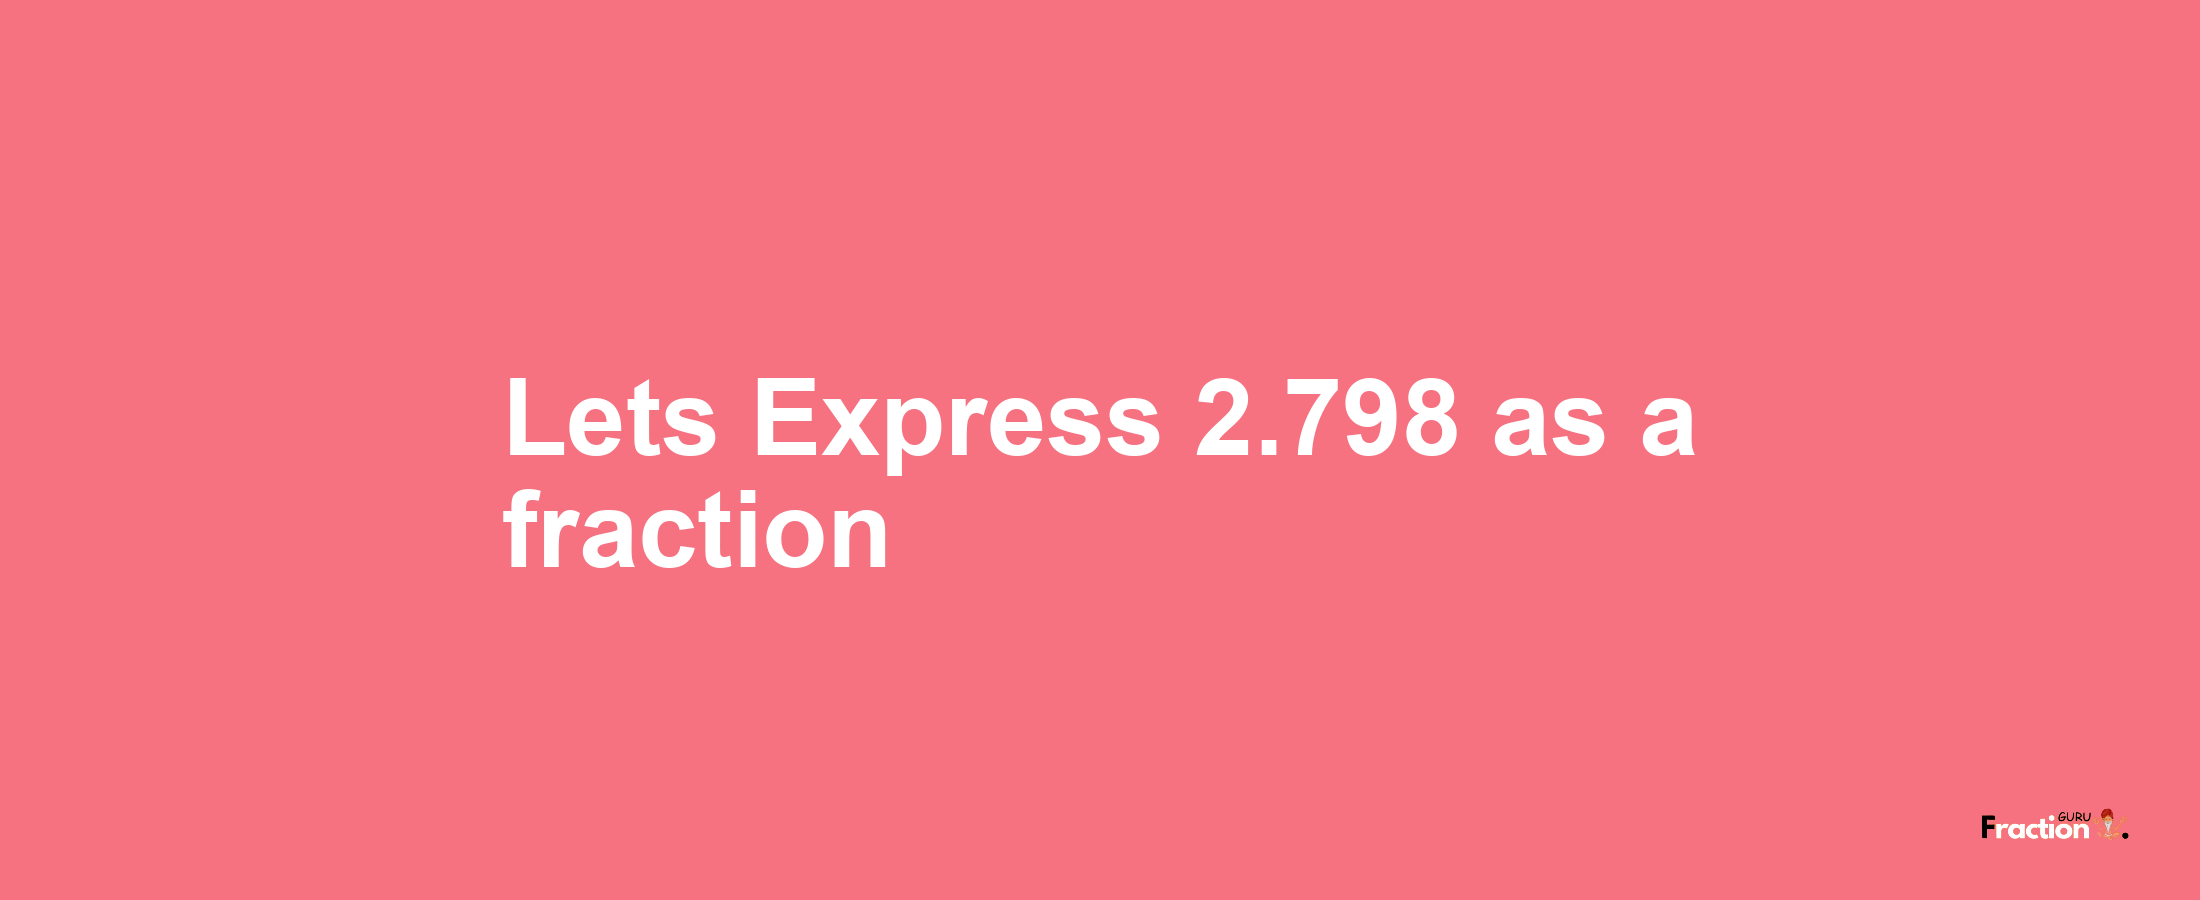 Lets Express 2.798 as afraction